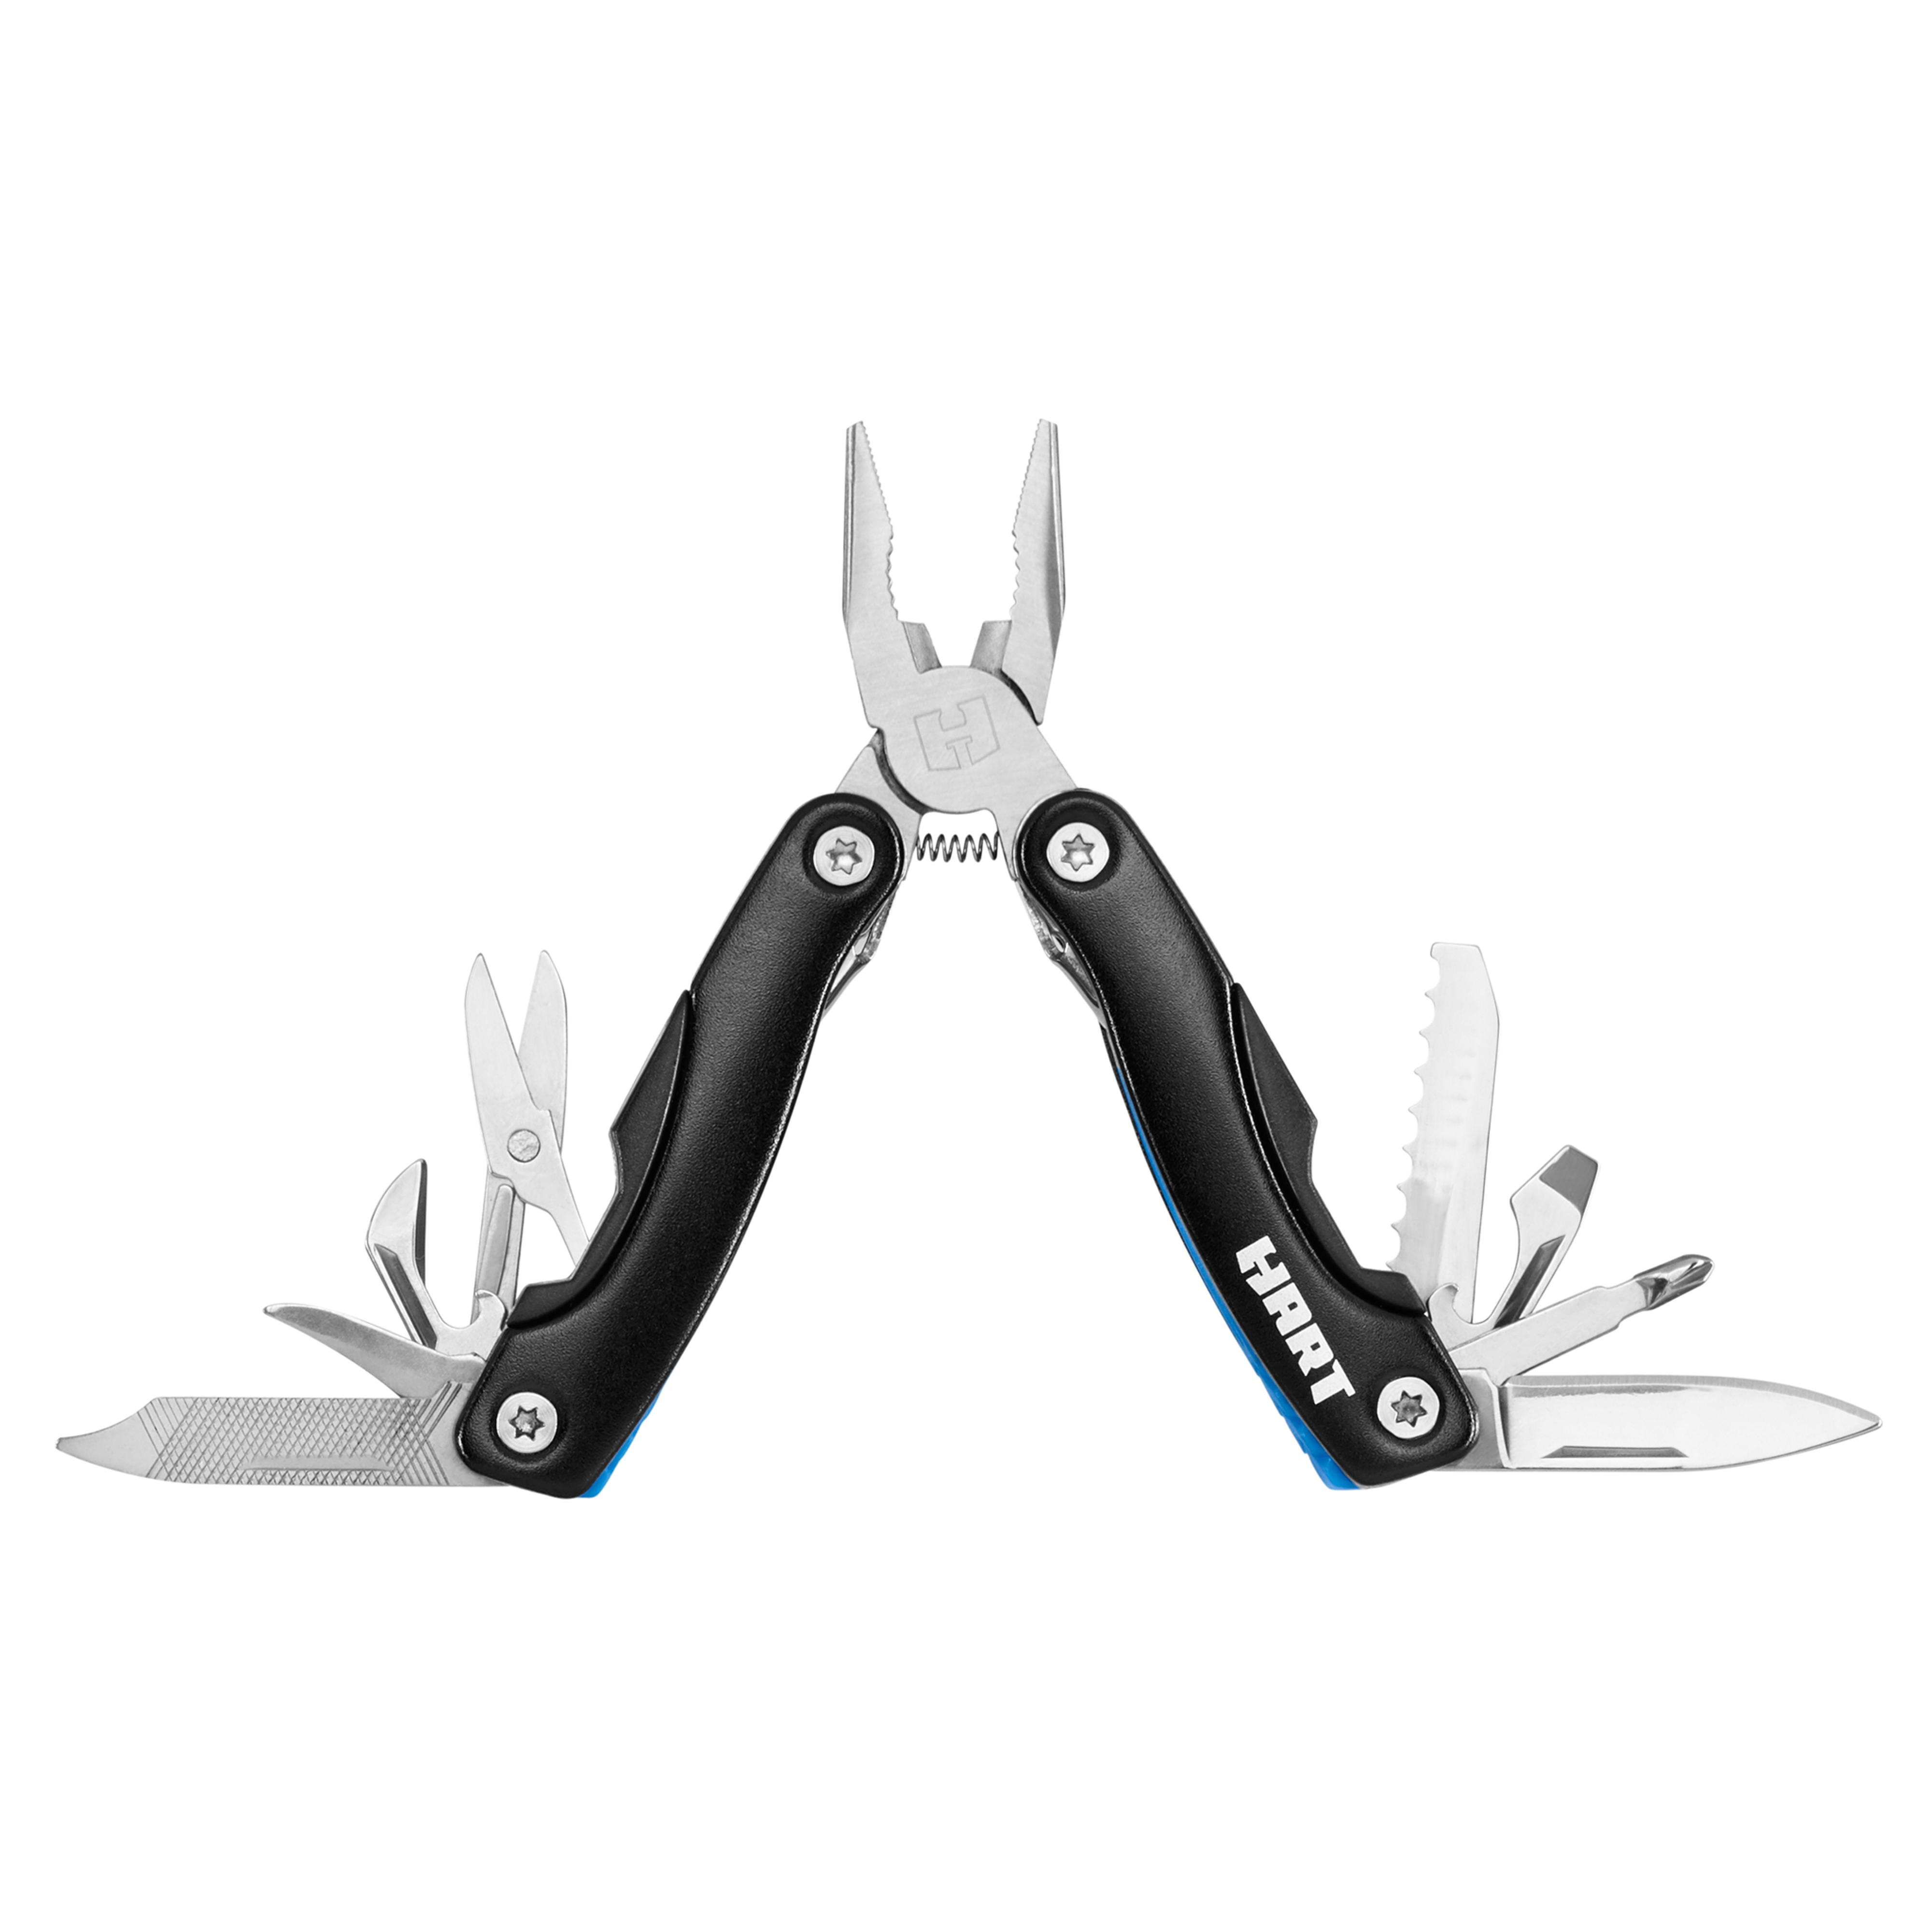 HART 14-in-1 Compact Multi-Tool with Storage Pouch - image 1 of 8